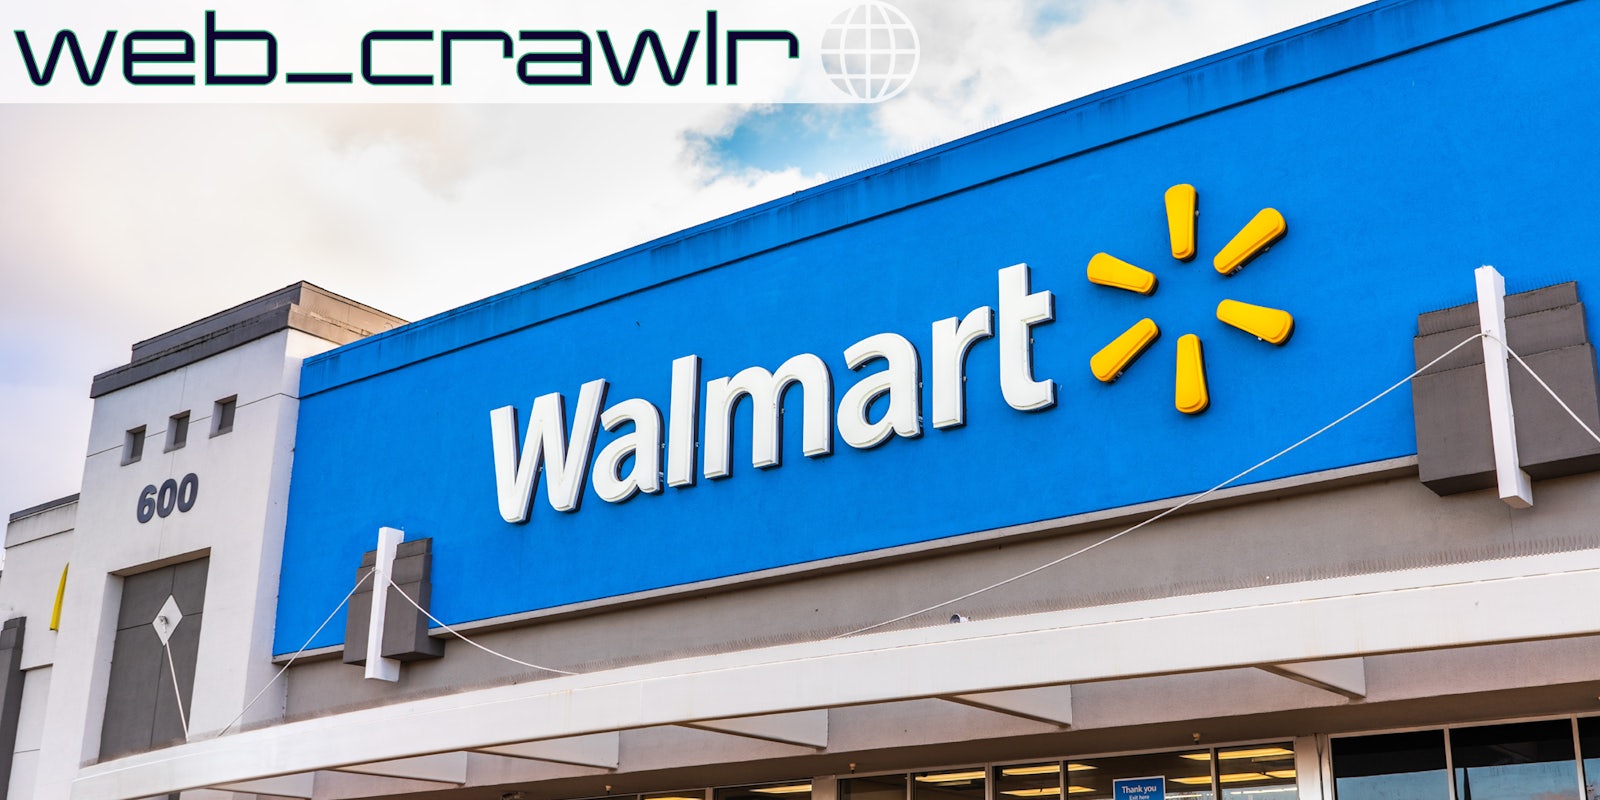 A Walmart store. The Daily Dot newsletter web_crawlr logo is in the top left corner.